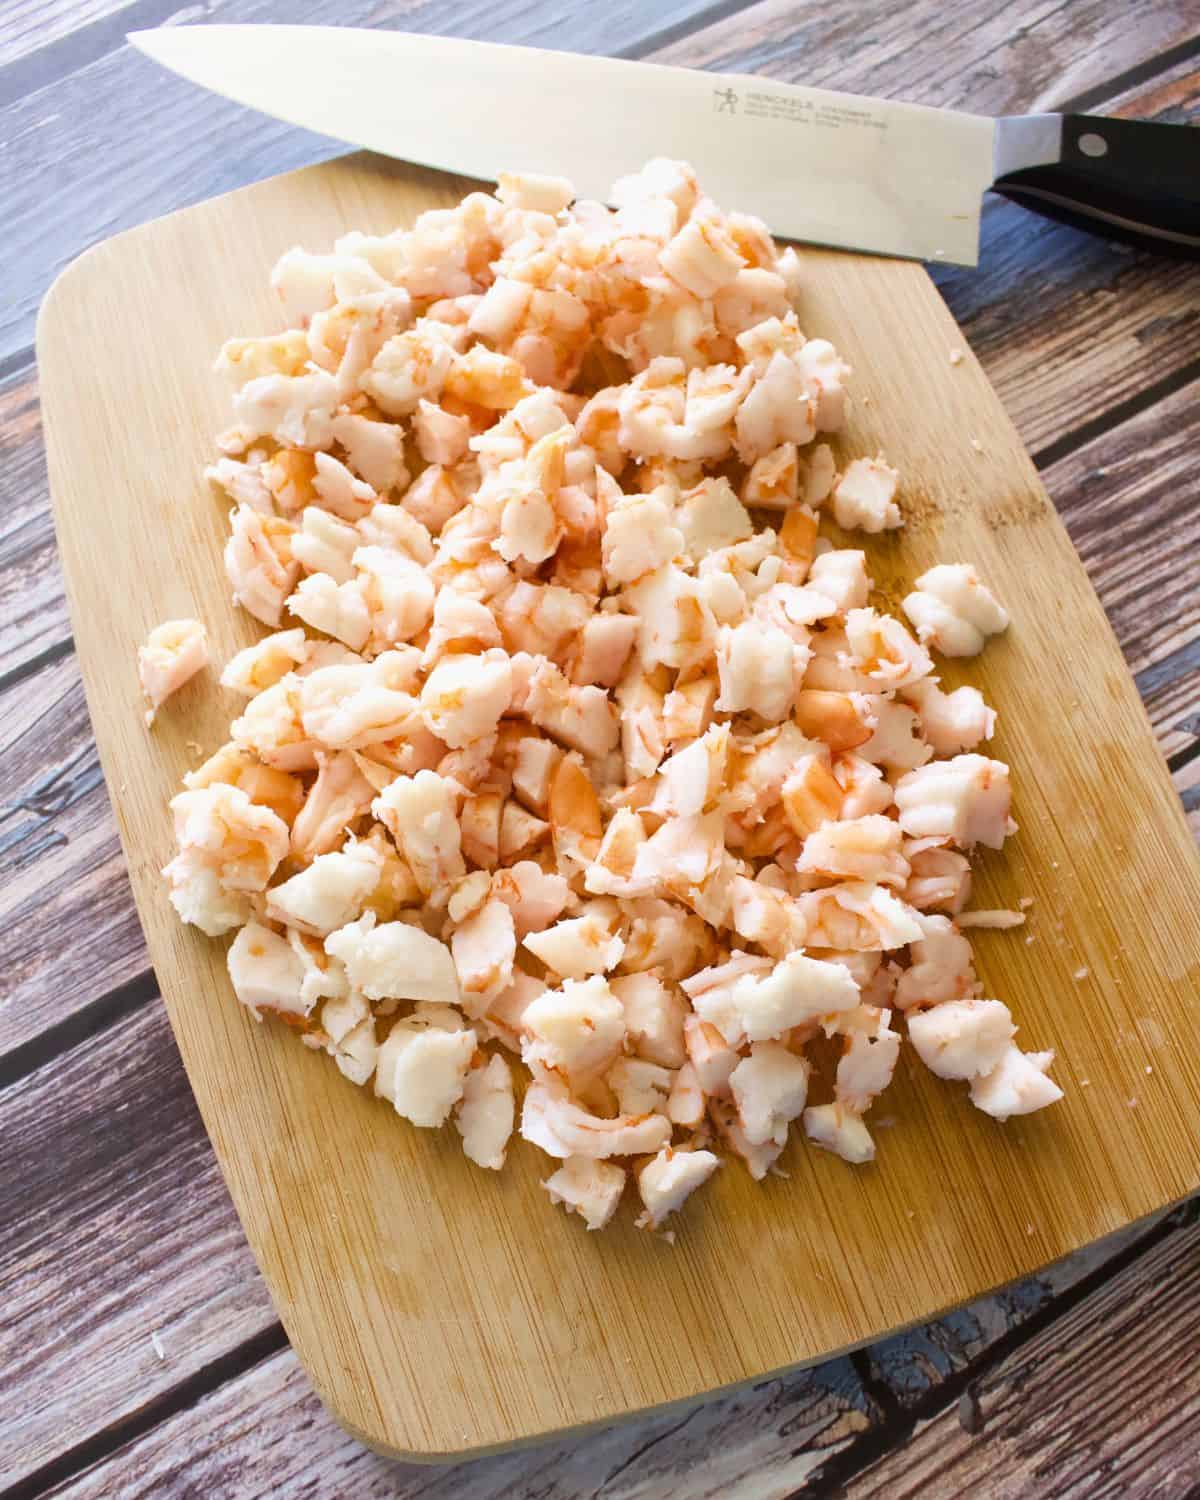 Cooked shrimp chopped into small pieces on a wooden cutting board.